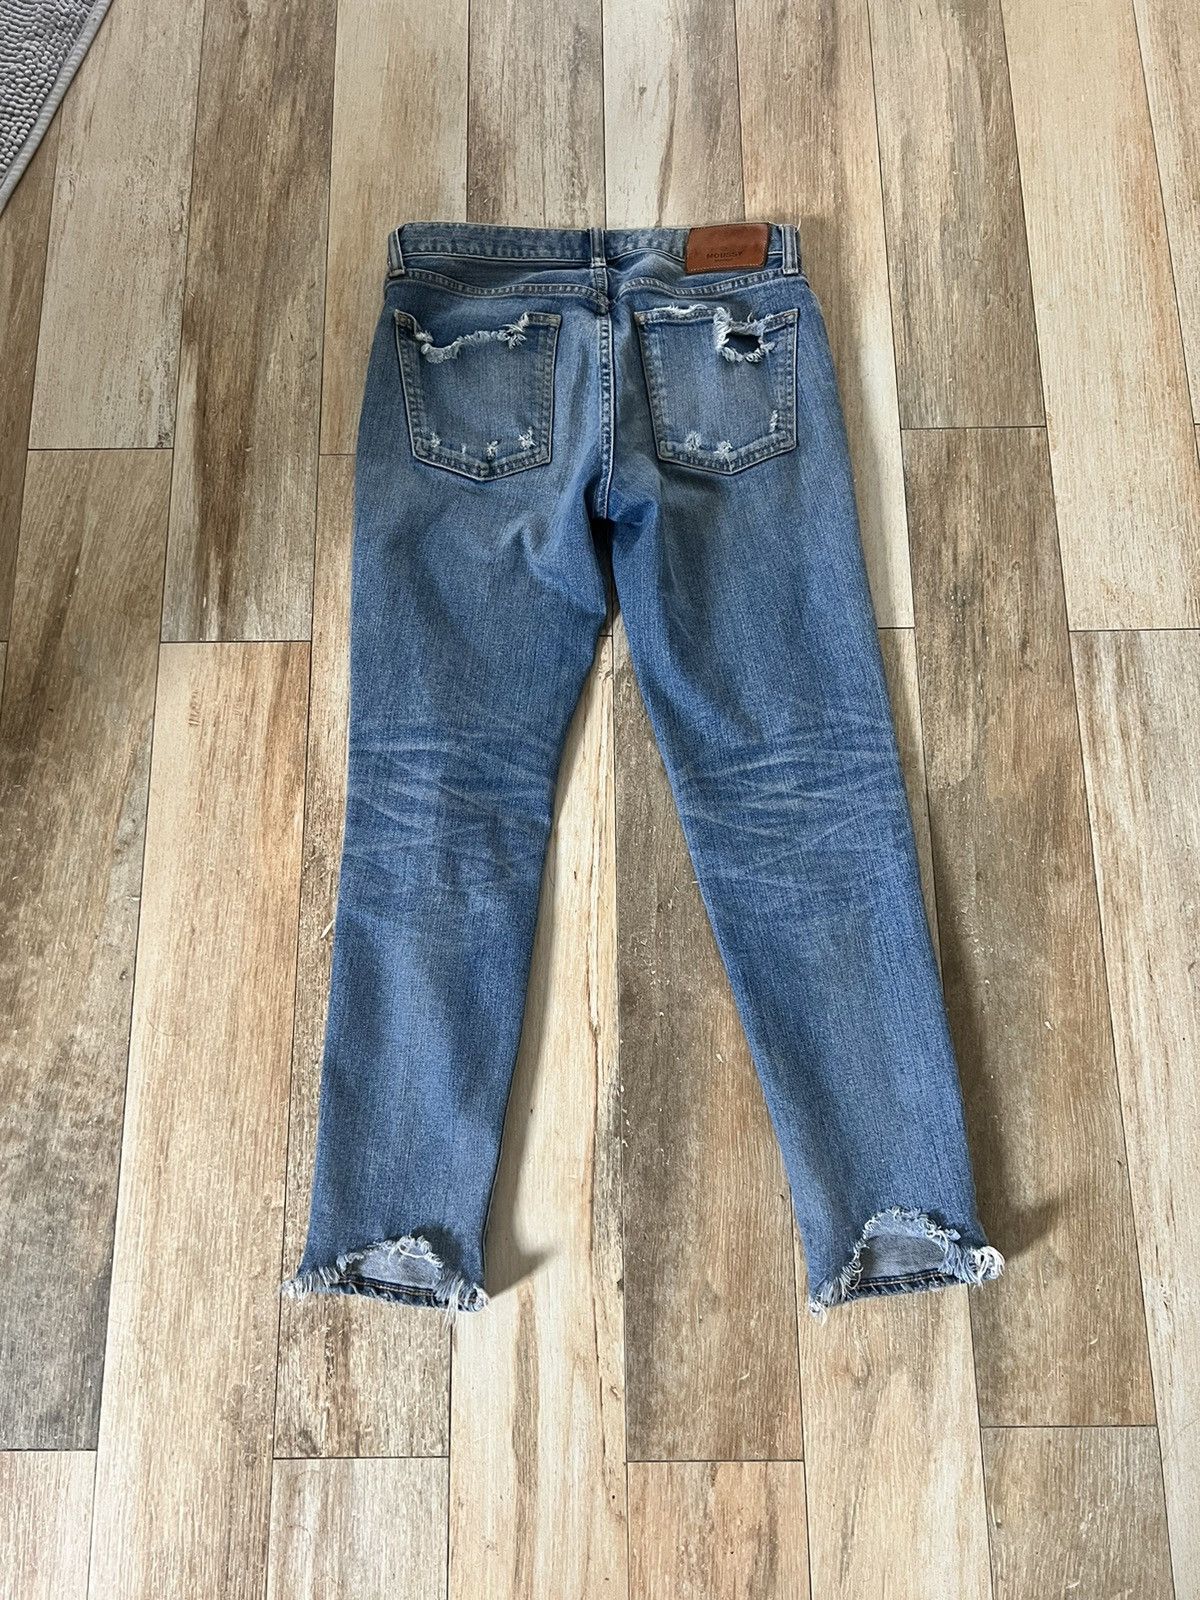 Japanese Brand Moussy Vintage Distressed Blue Jeans Size 27" / US 4 / IT 40 - 5 Thumbnail